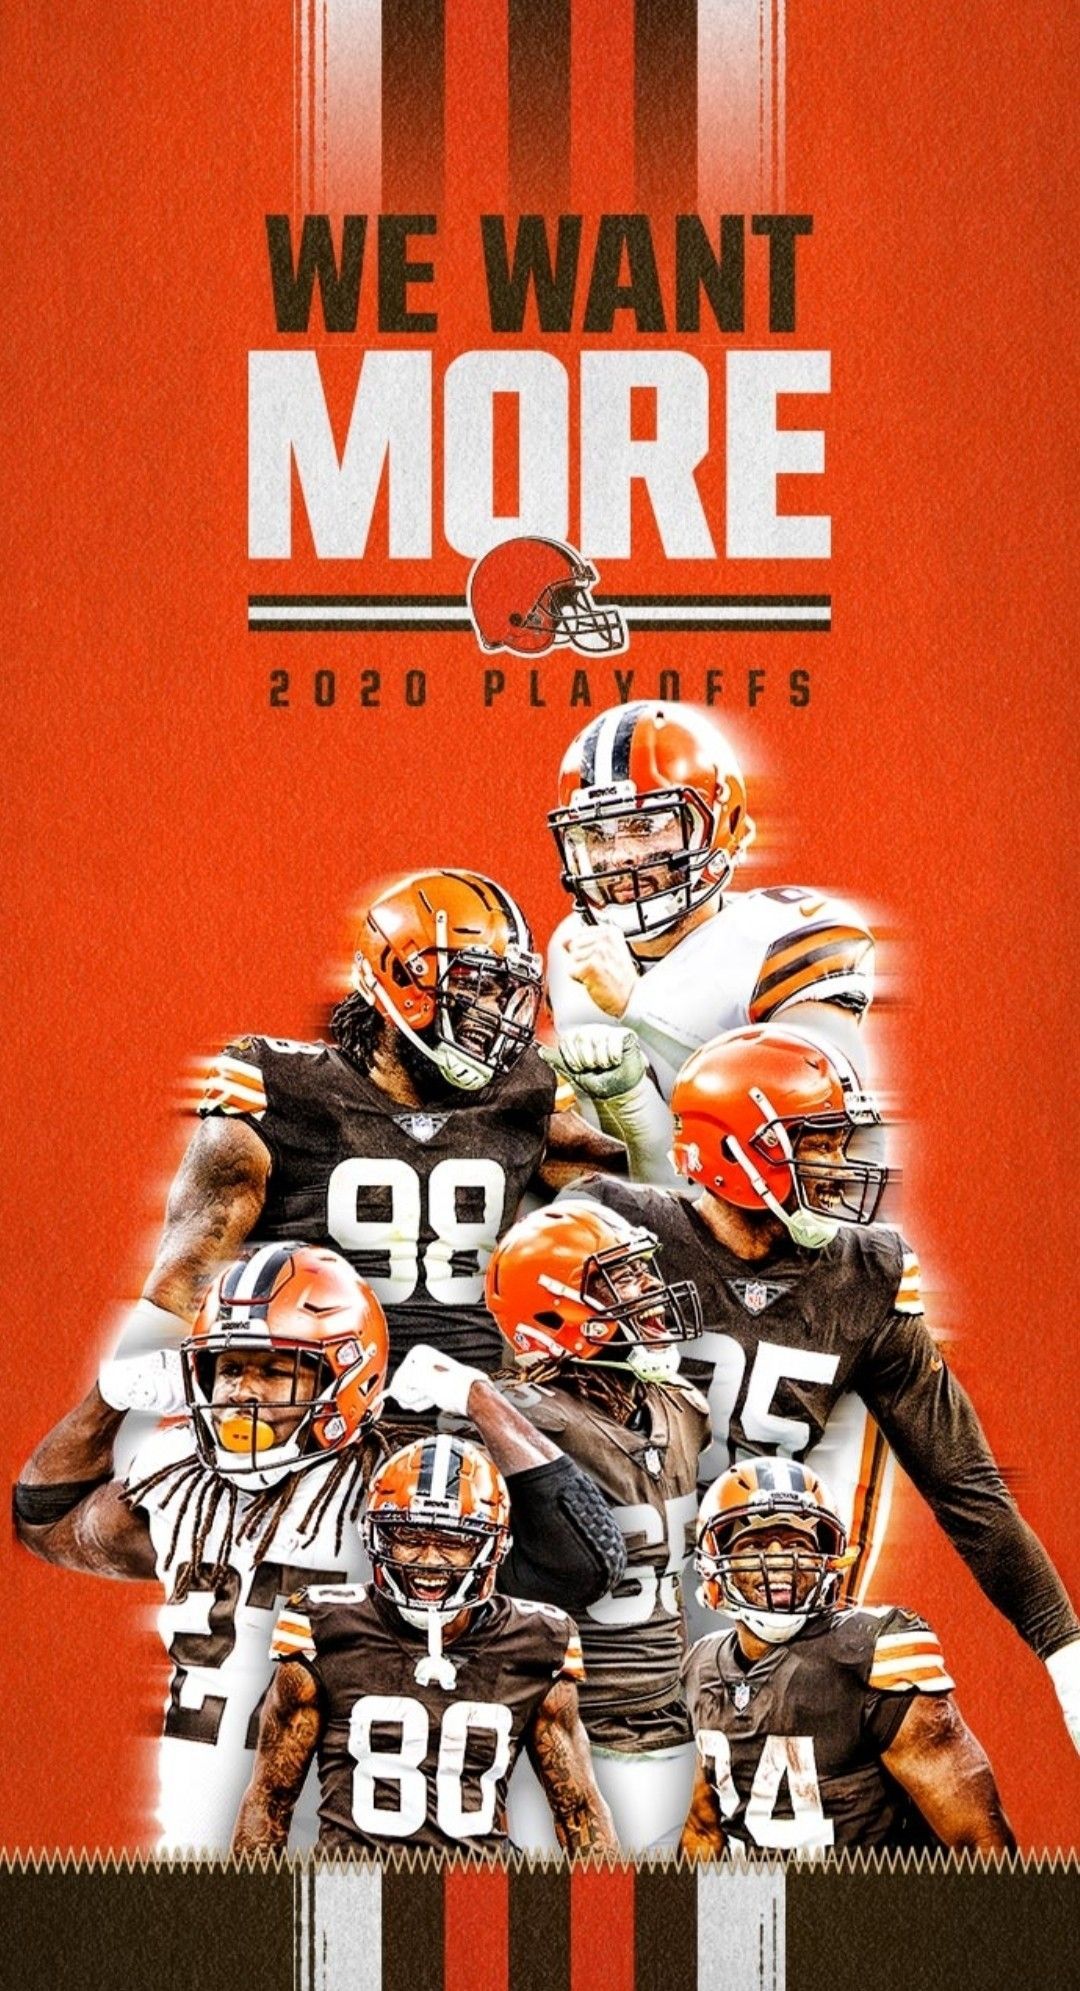 Cleveland Browns We Want More 2020 Playoffs. Cleveland browns wallpaper, Cleveland browns, Cleveland browns football